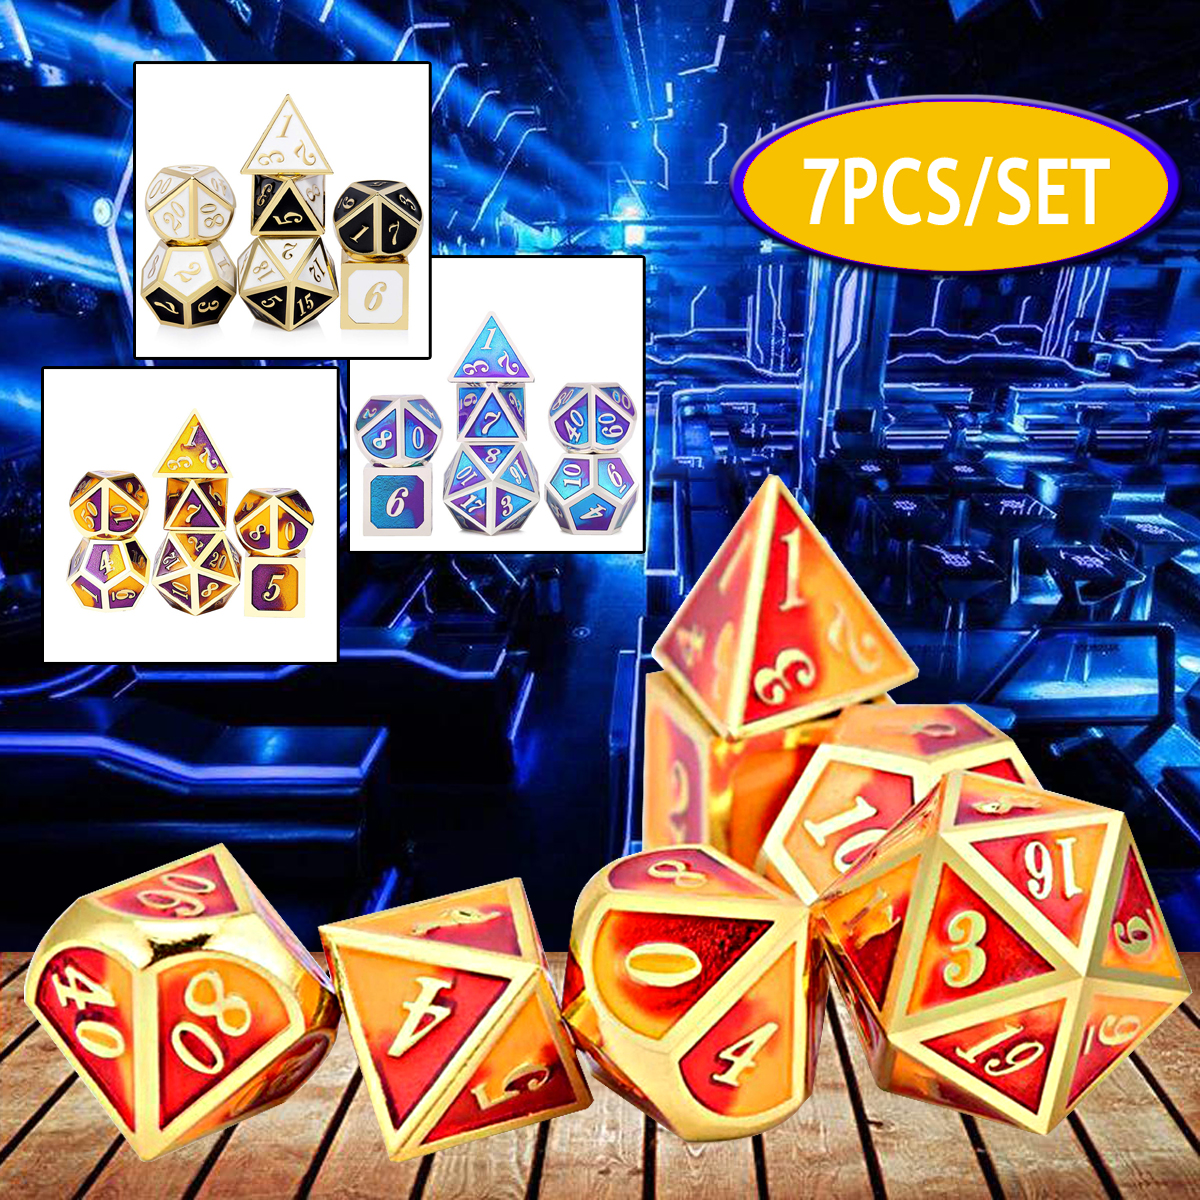 7PCSSET-Creative-Metal-Multi-faced-Dice-Set-Heavy-Duty-Polyhedral-Dices-Role-Playing-Game-Party-Game-1584212-2